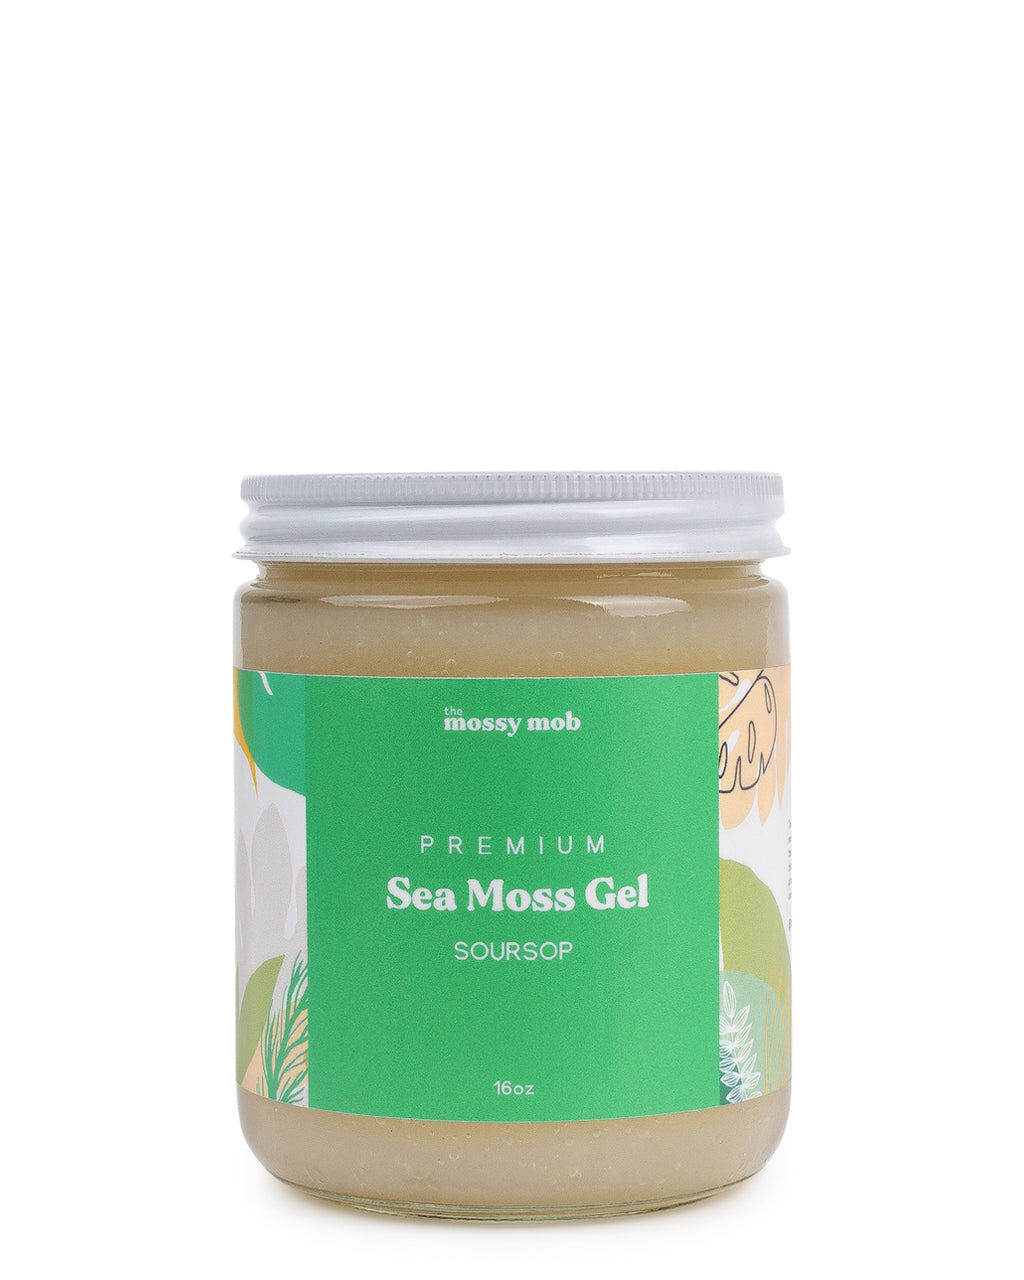 Don't Be A Soursop! Wildcrafted Irish Sea Moss Gel – themossymob